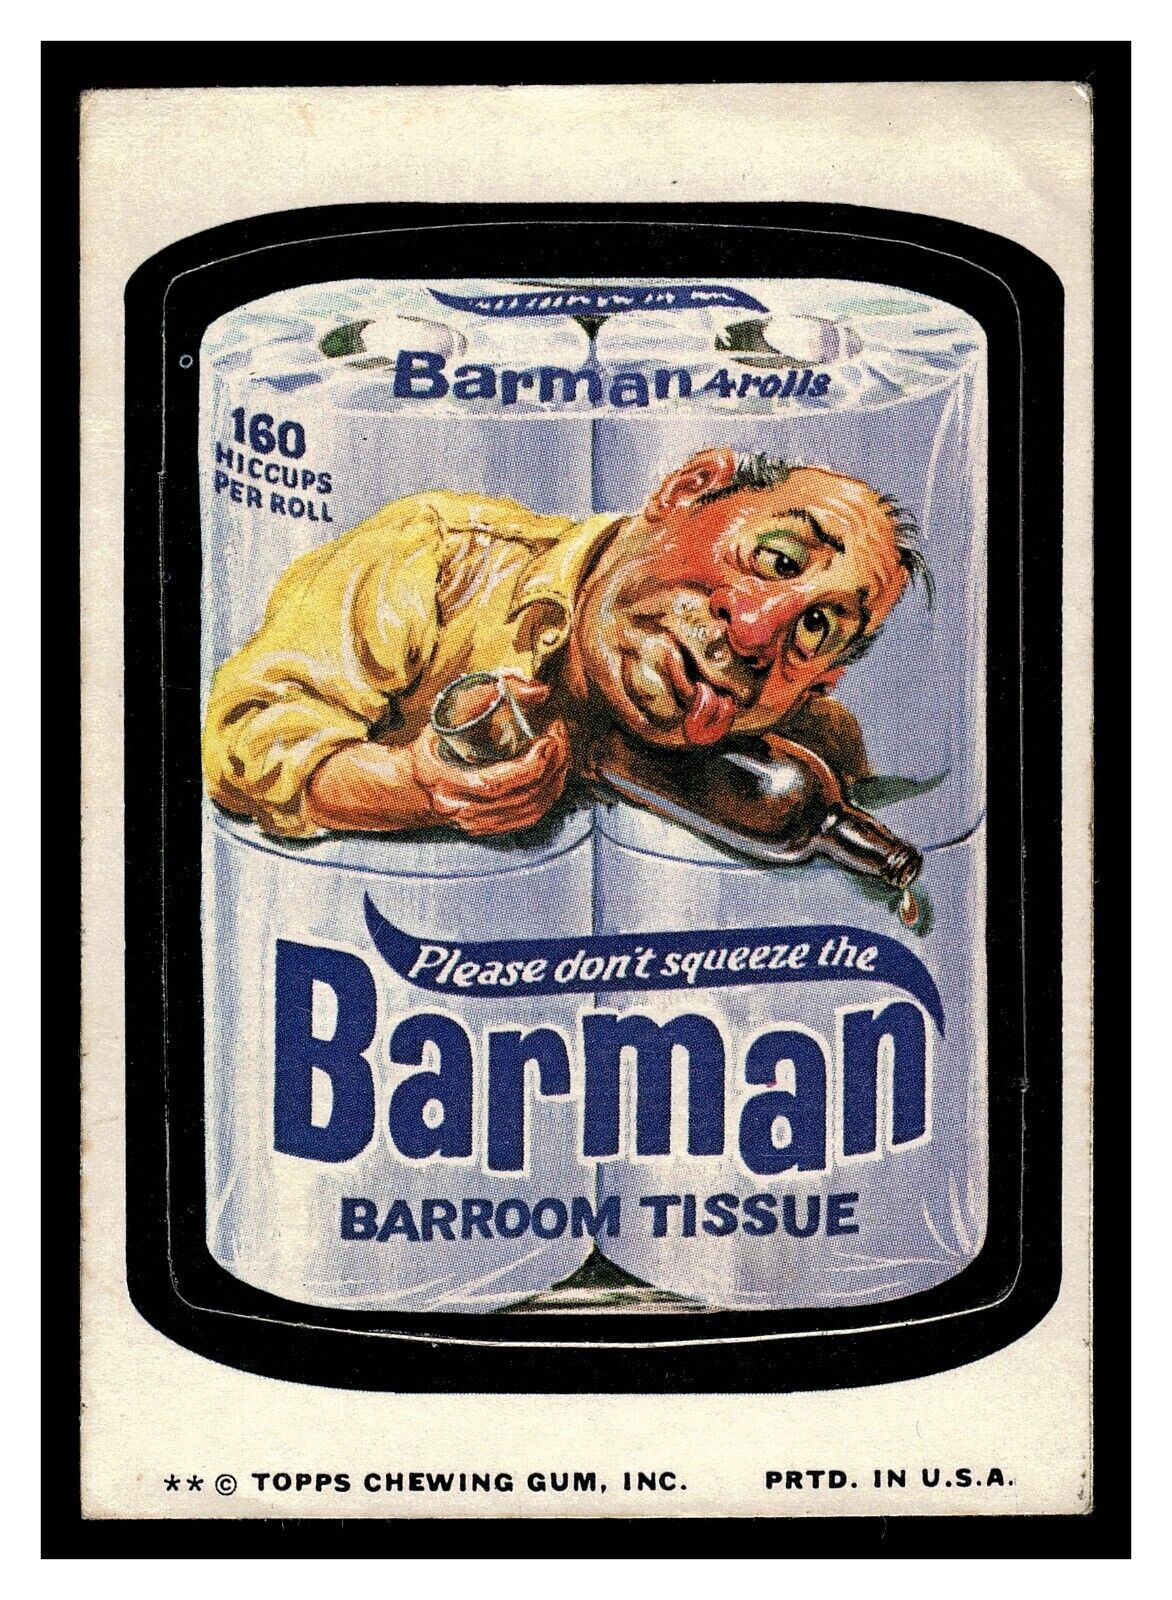 1975 TOPPS WACKY PACKAGES BARMAN BARROOM TISSUE DON\'T SQUEEZE SERIES 12 TAN BACK